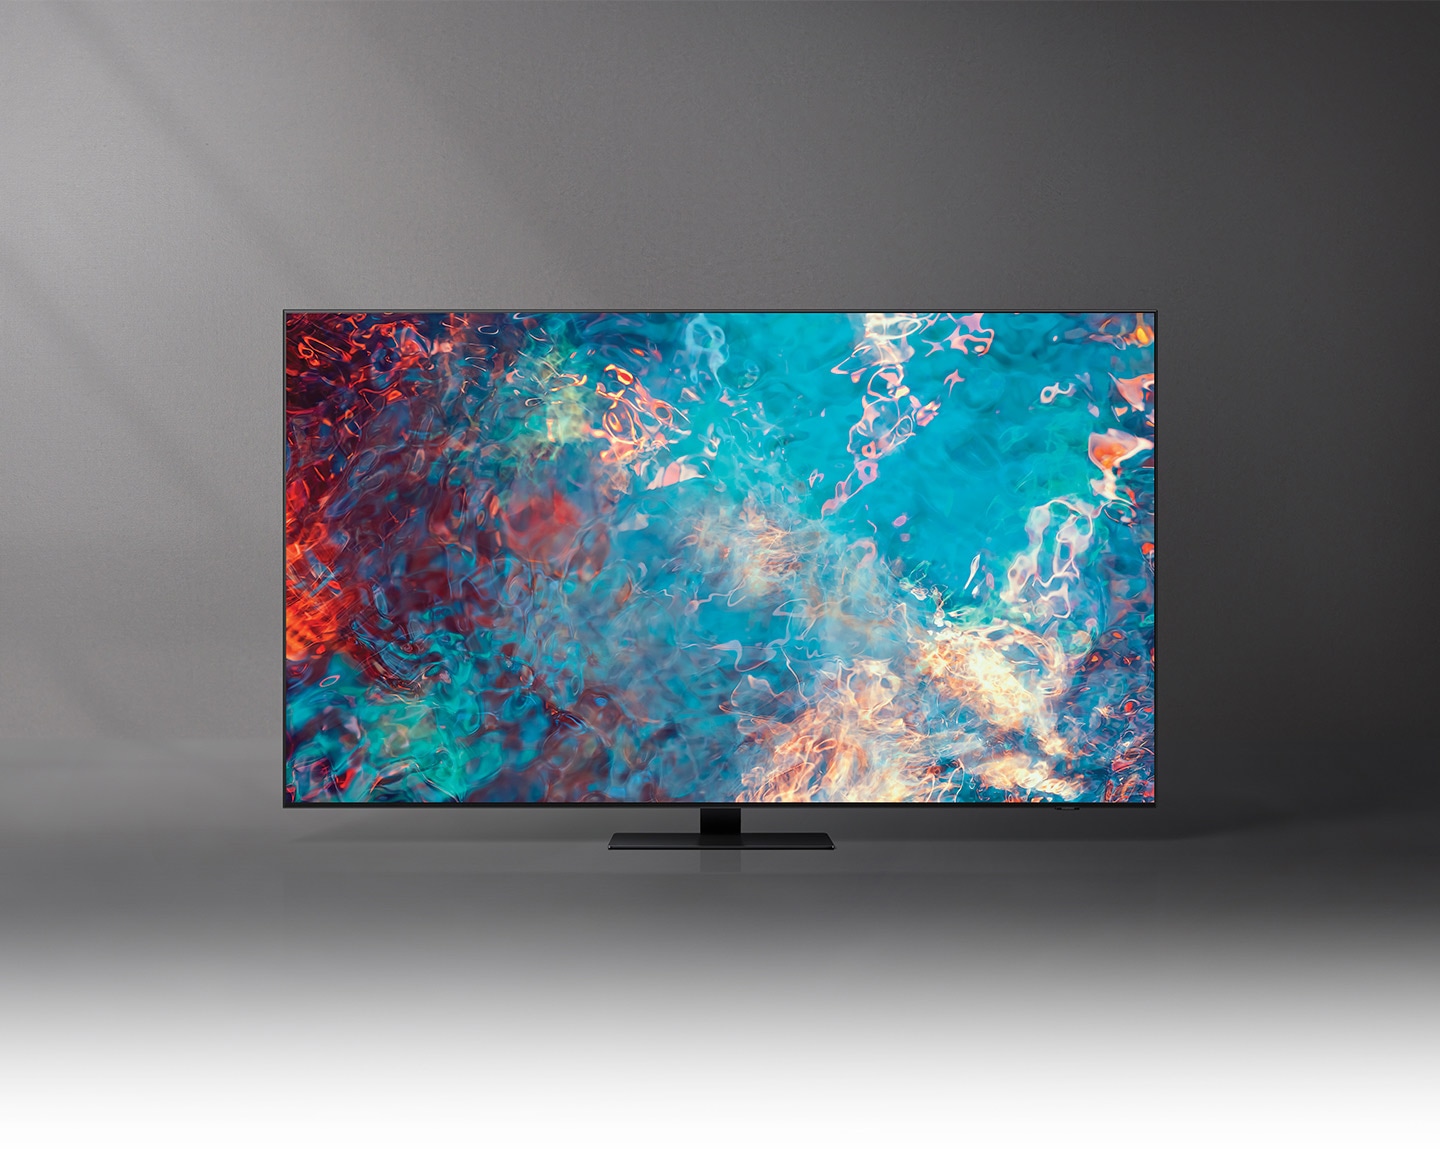 Our most powerful 4K experience on a Samsung TV yet